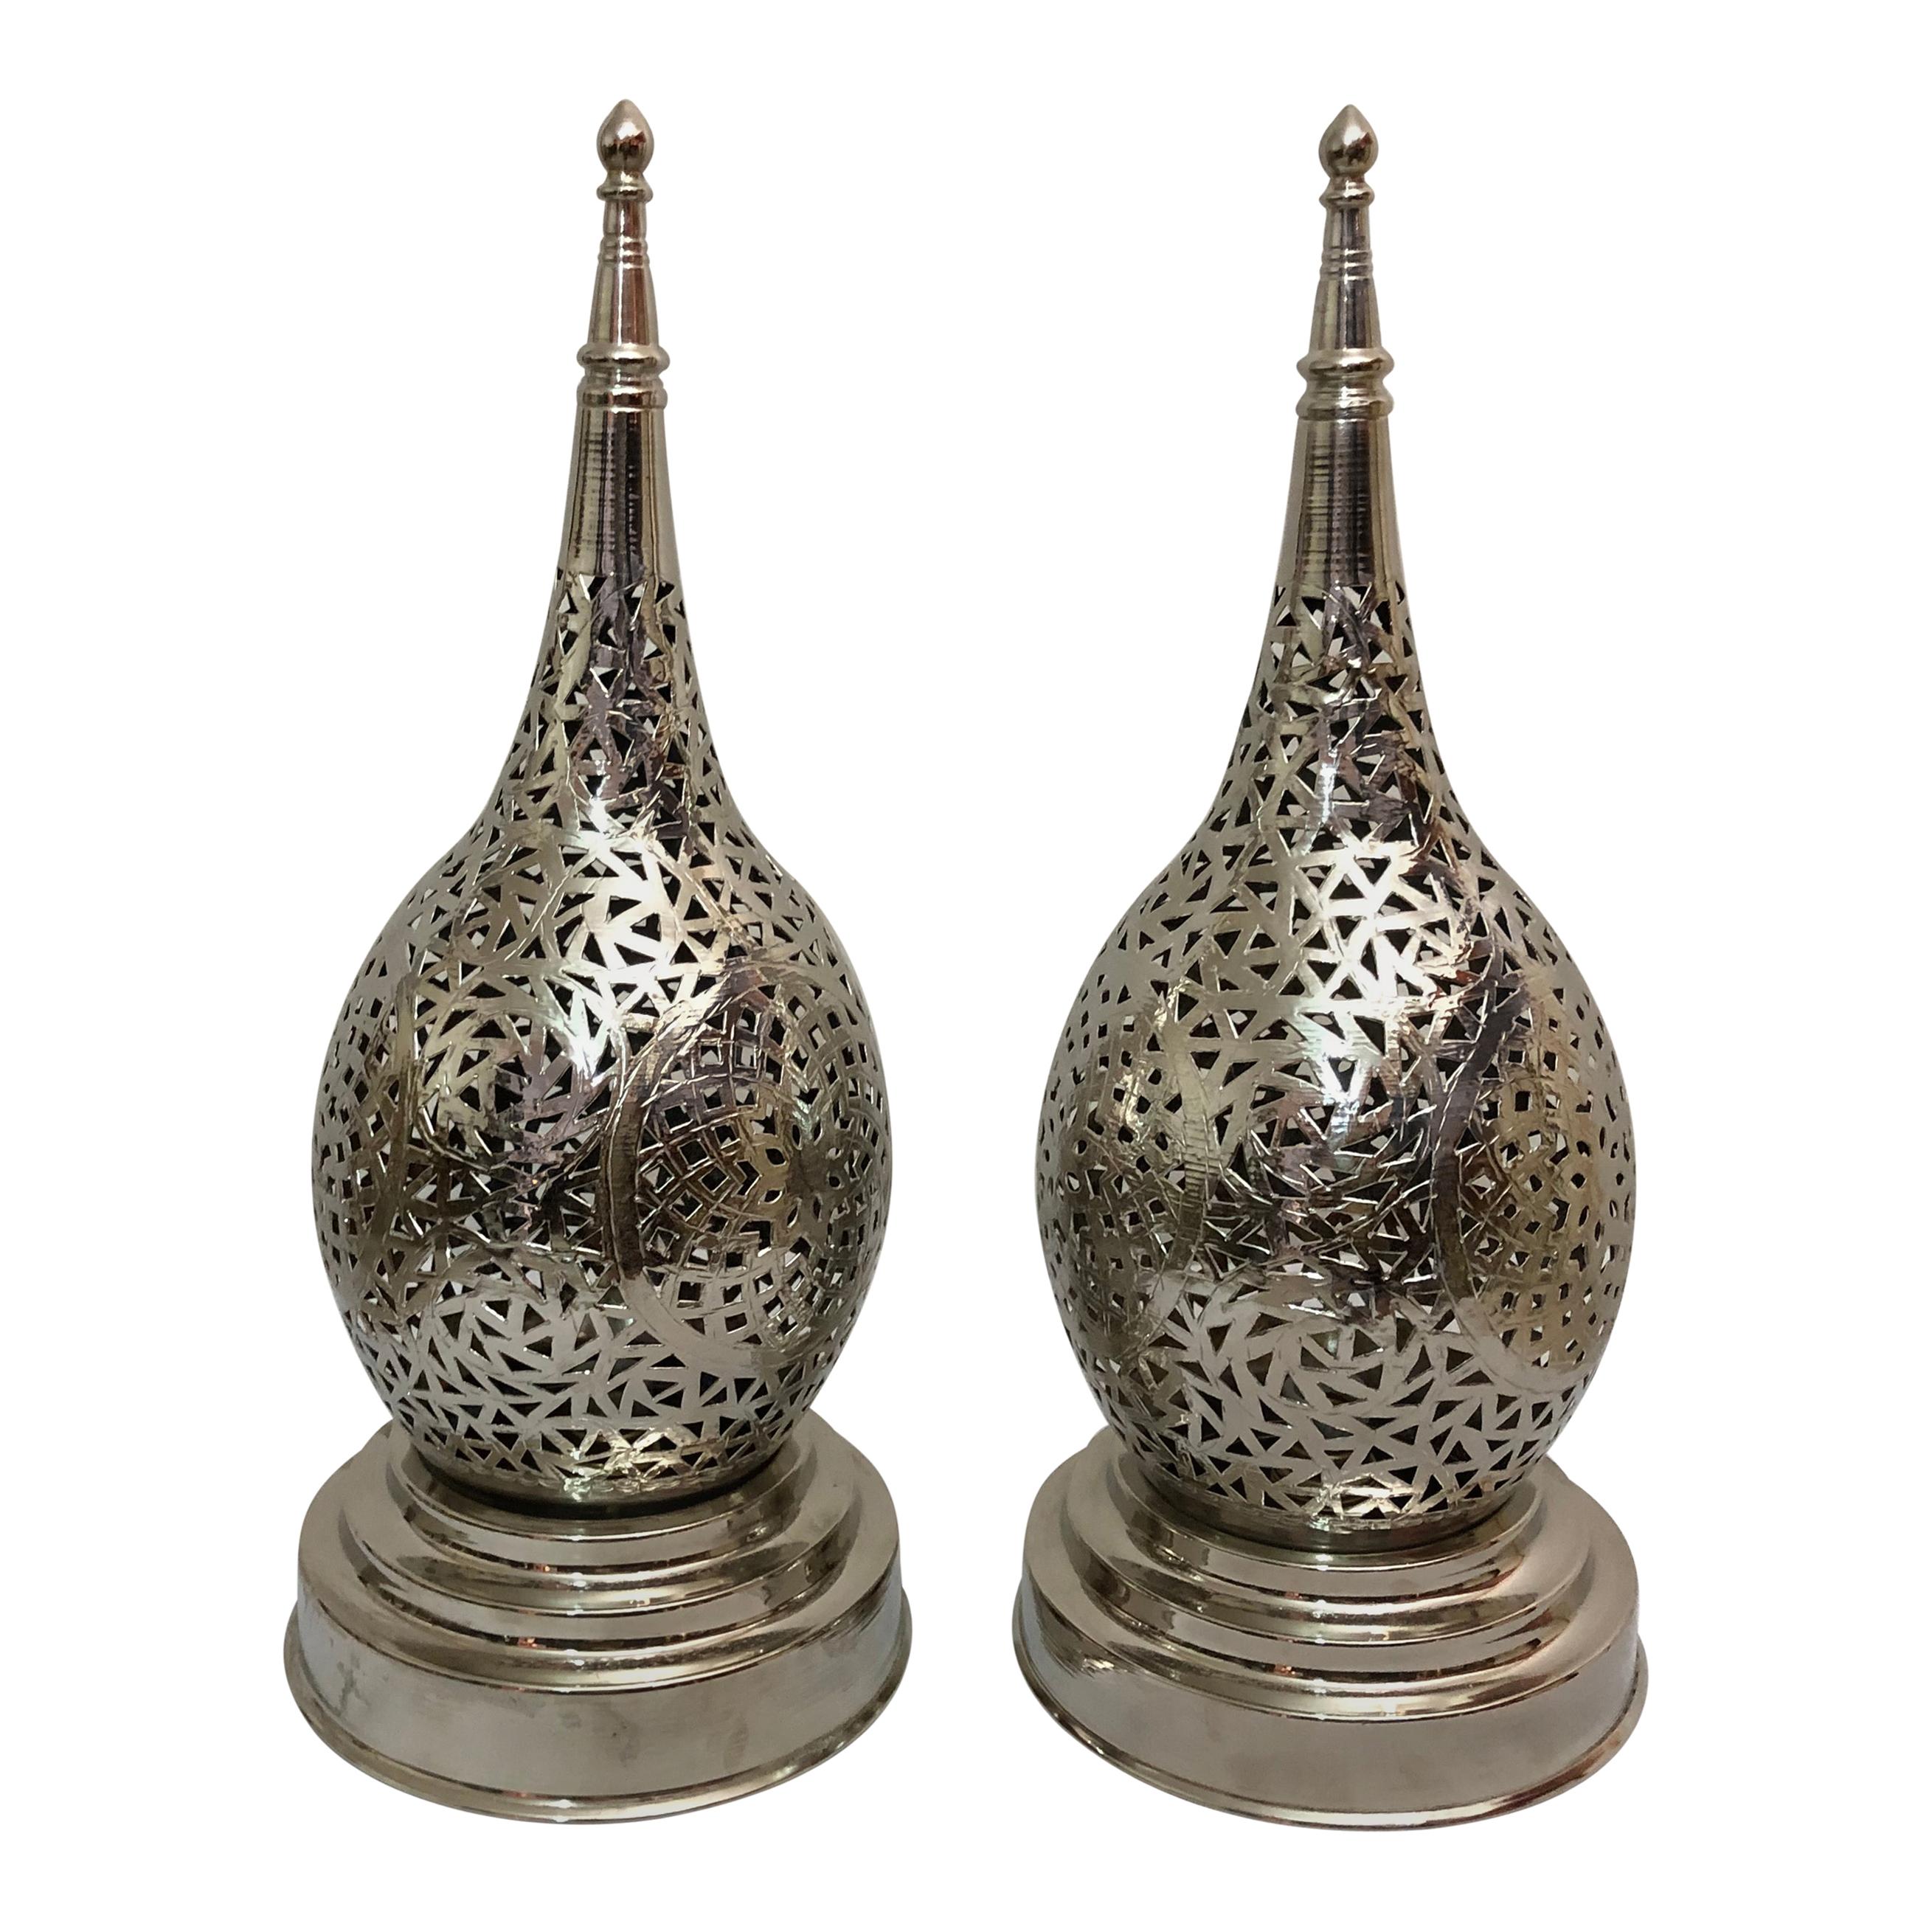 Tear Shaped Brass Handmade Table Lamps, a Pair